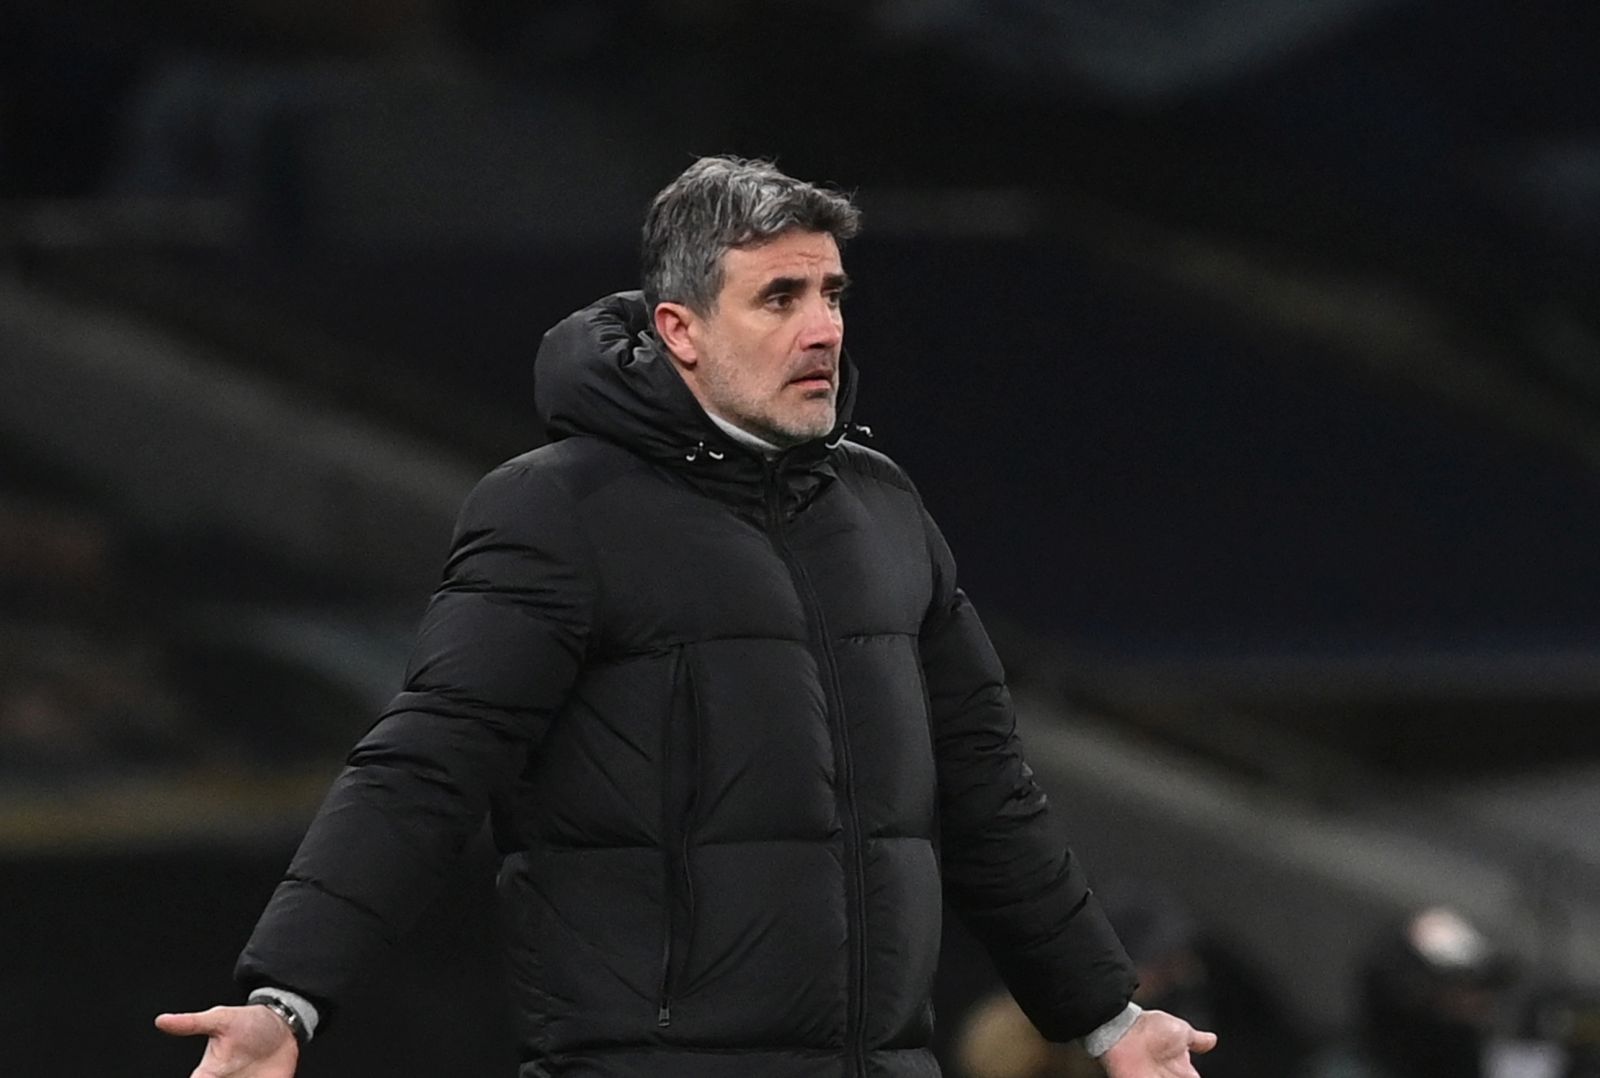 epa09068723 Dinamo head coach Zoran Mamic reacts during the UEFA Europa League round of 16, first leg soccer match between Tottenham Hotspur and Dinamo Zagreb in London, Britain, 11 March 2021.  EPA/Neil Hall / POOL